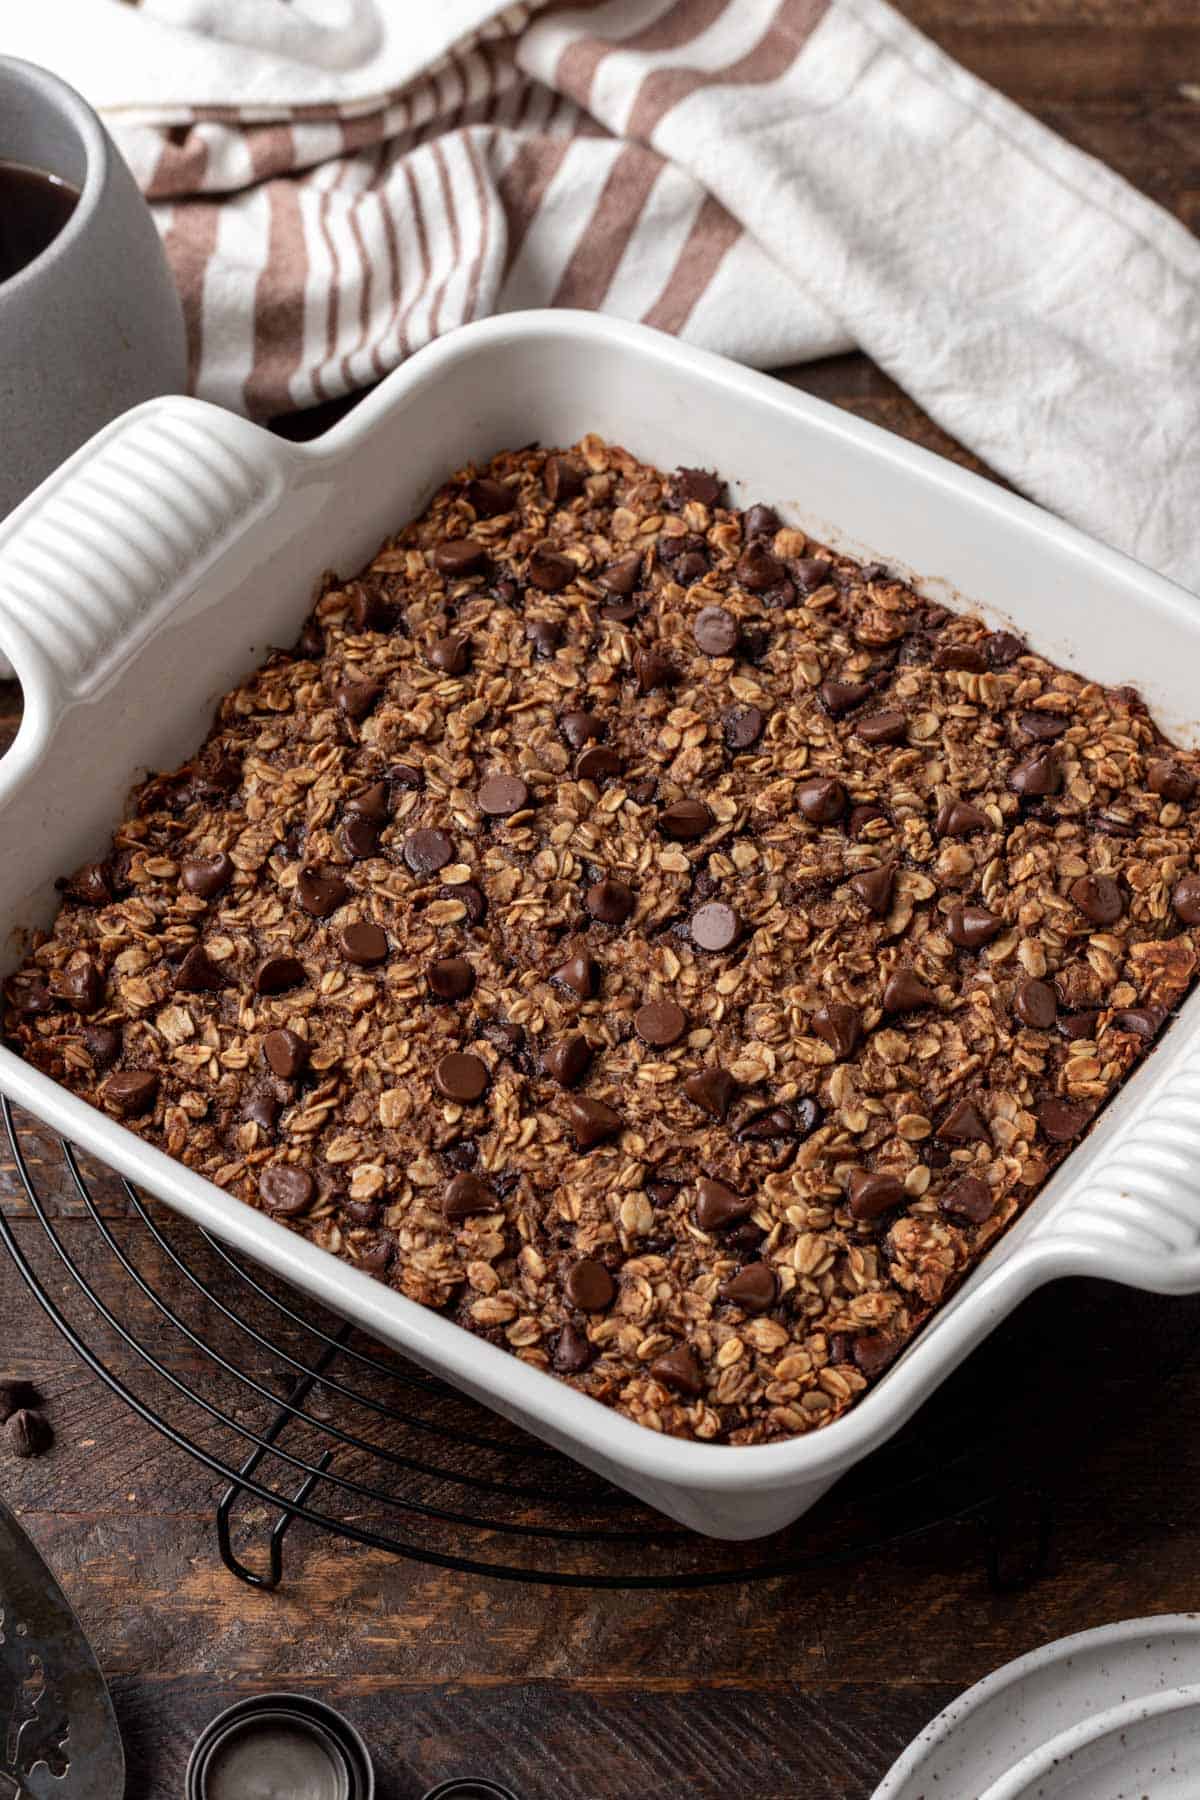 Chocolate baked oats topped with chocolate chips in a white baking dish.